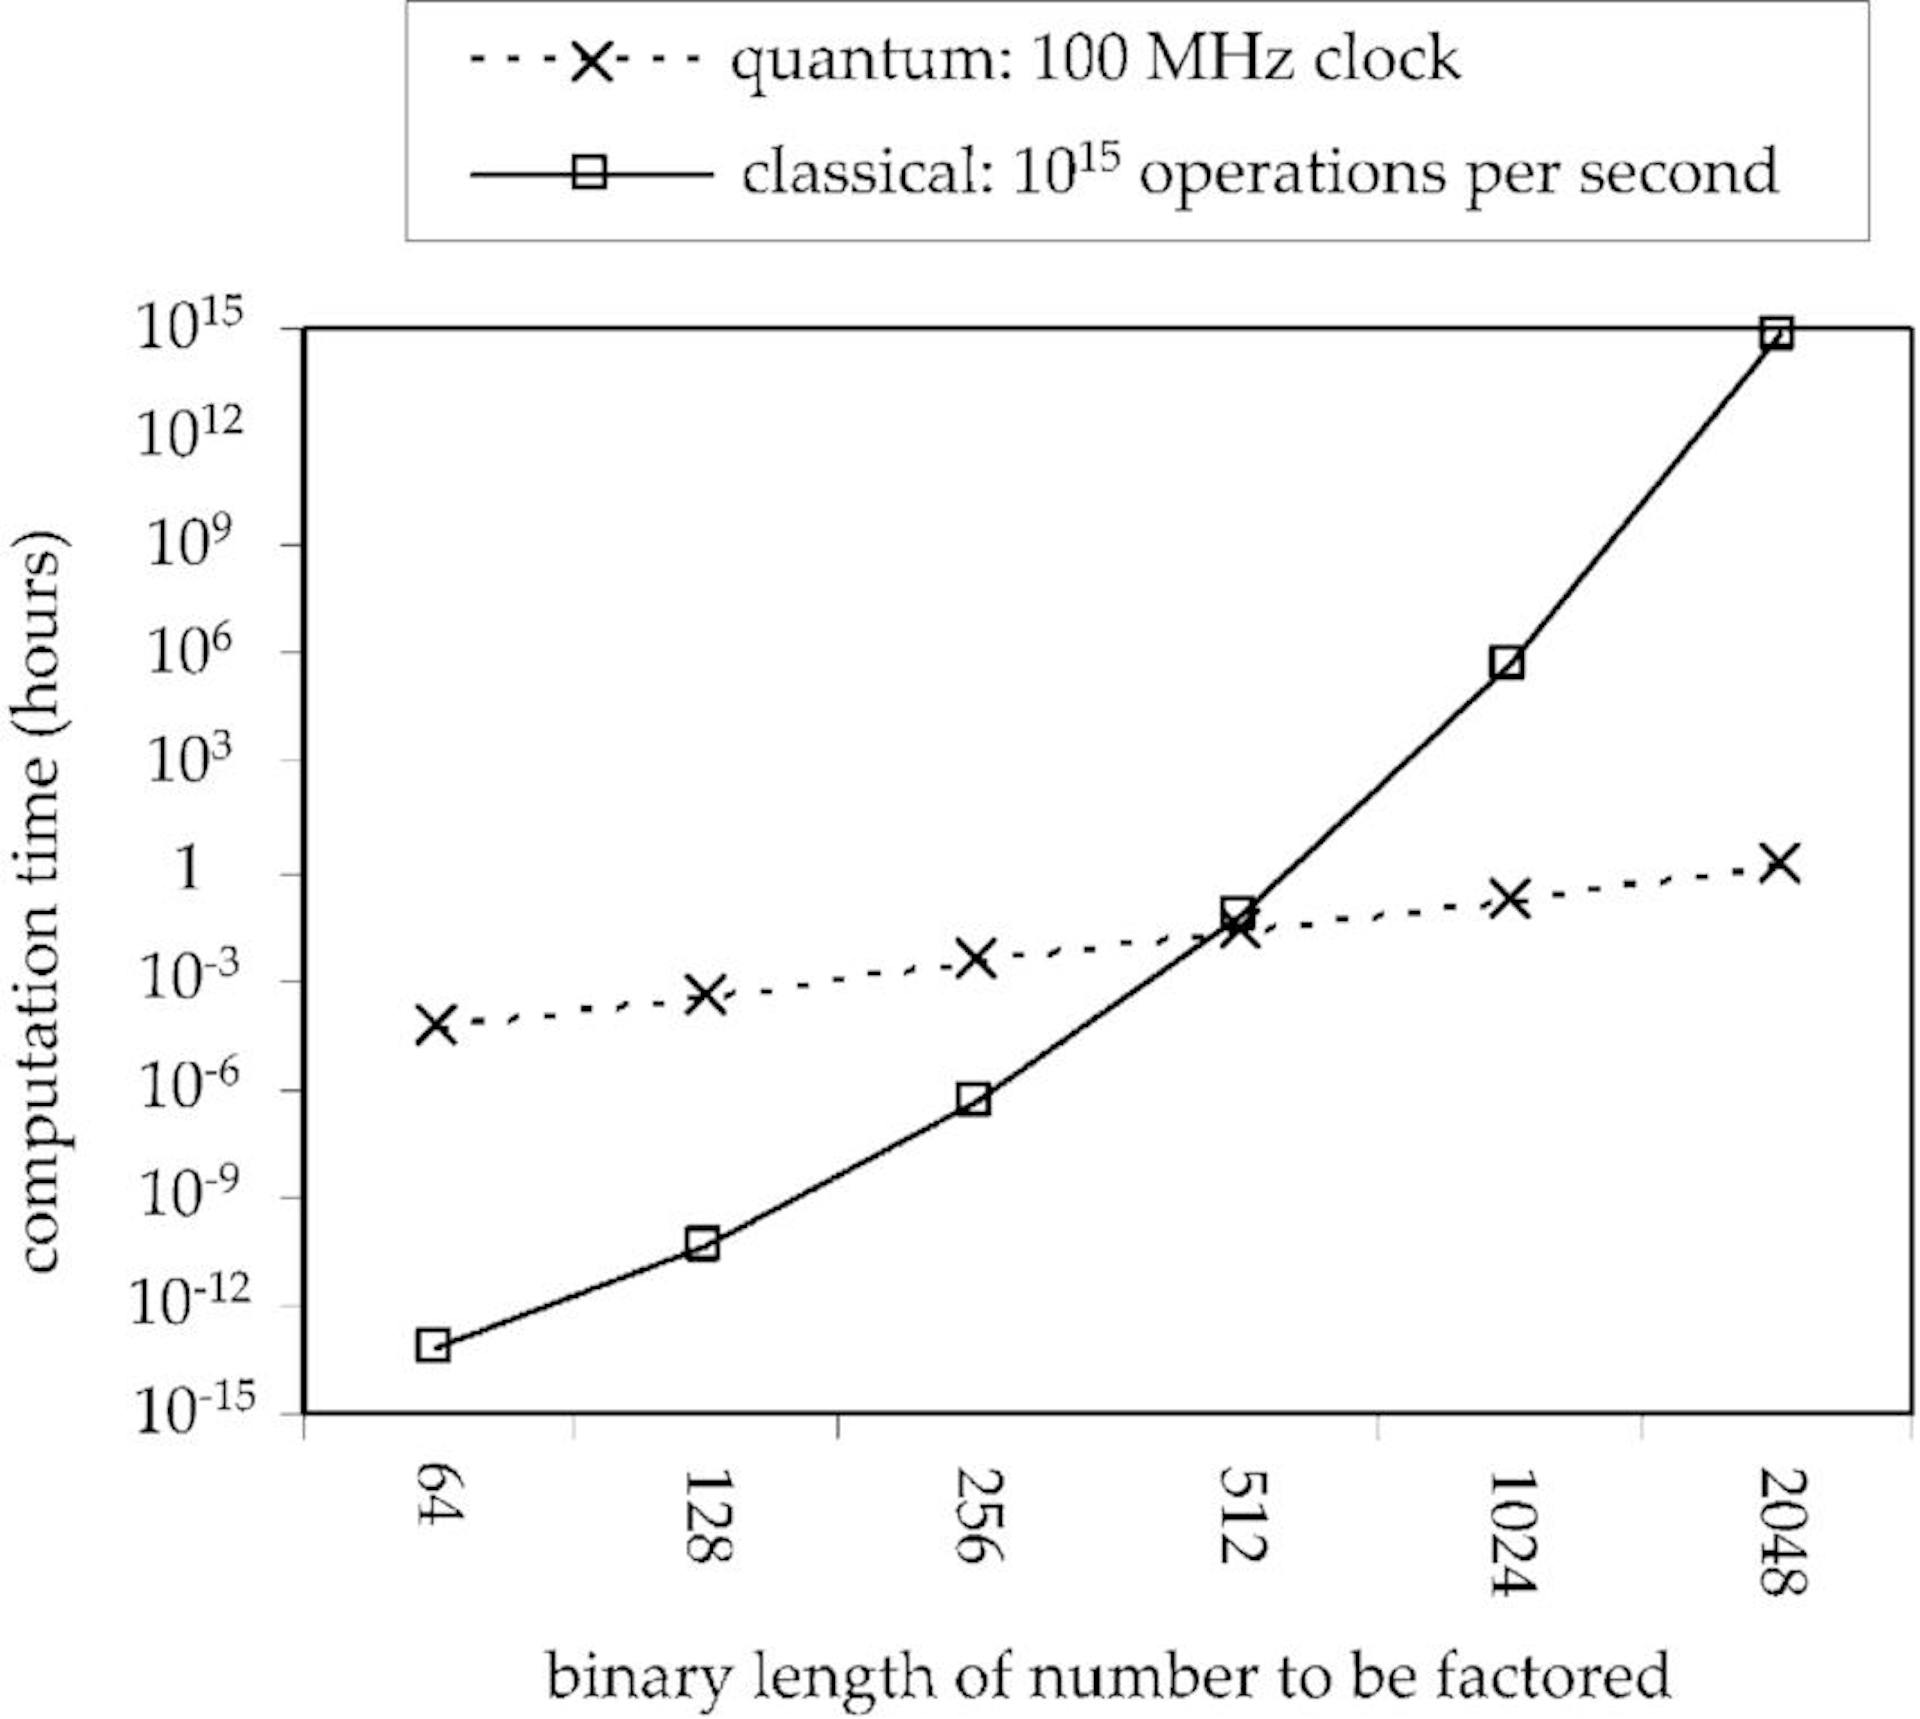 Kaynak - https://www.researchgate.net/figure/Comparison-of-estimated-computation-time-in-hours-for-the-problem-of-factoring-numbers-of_fig1_2986358